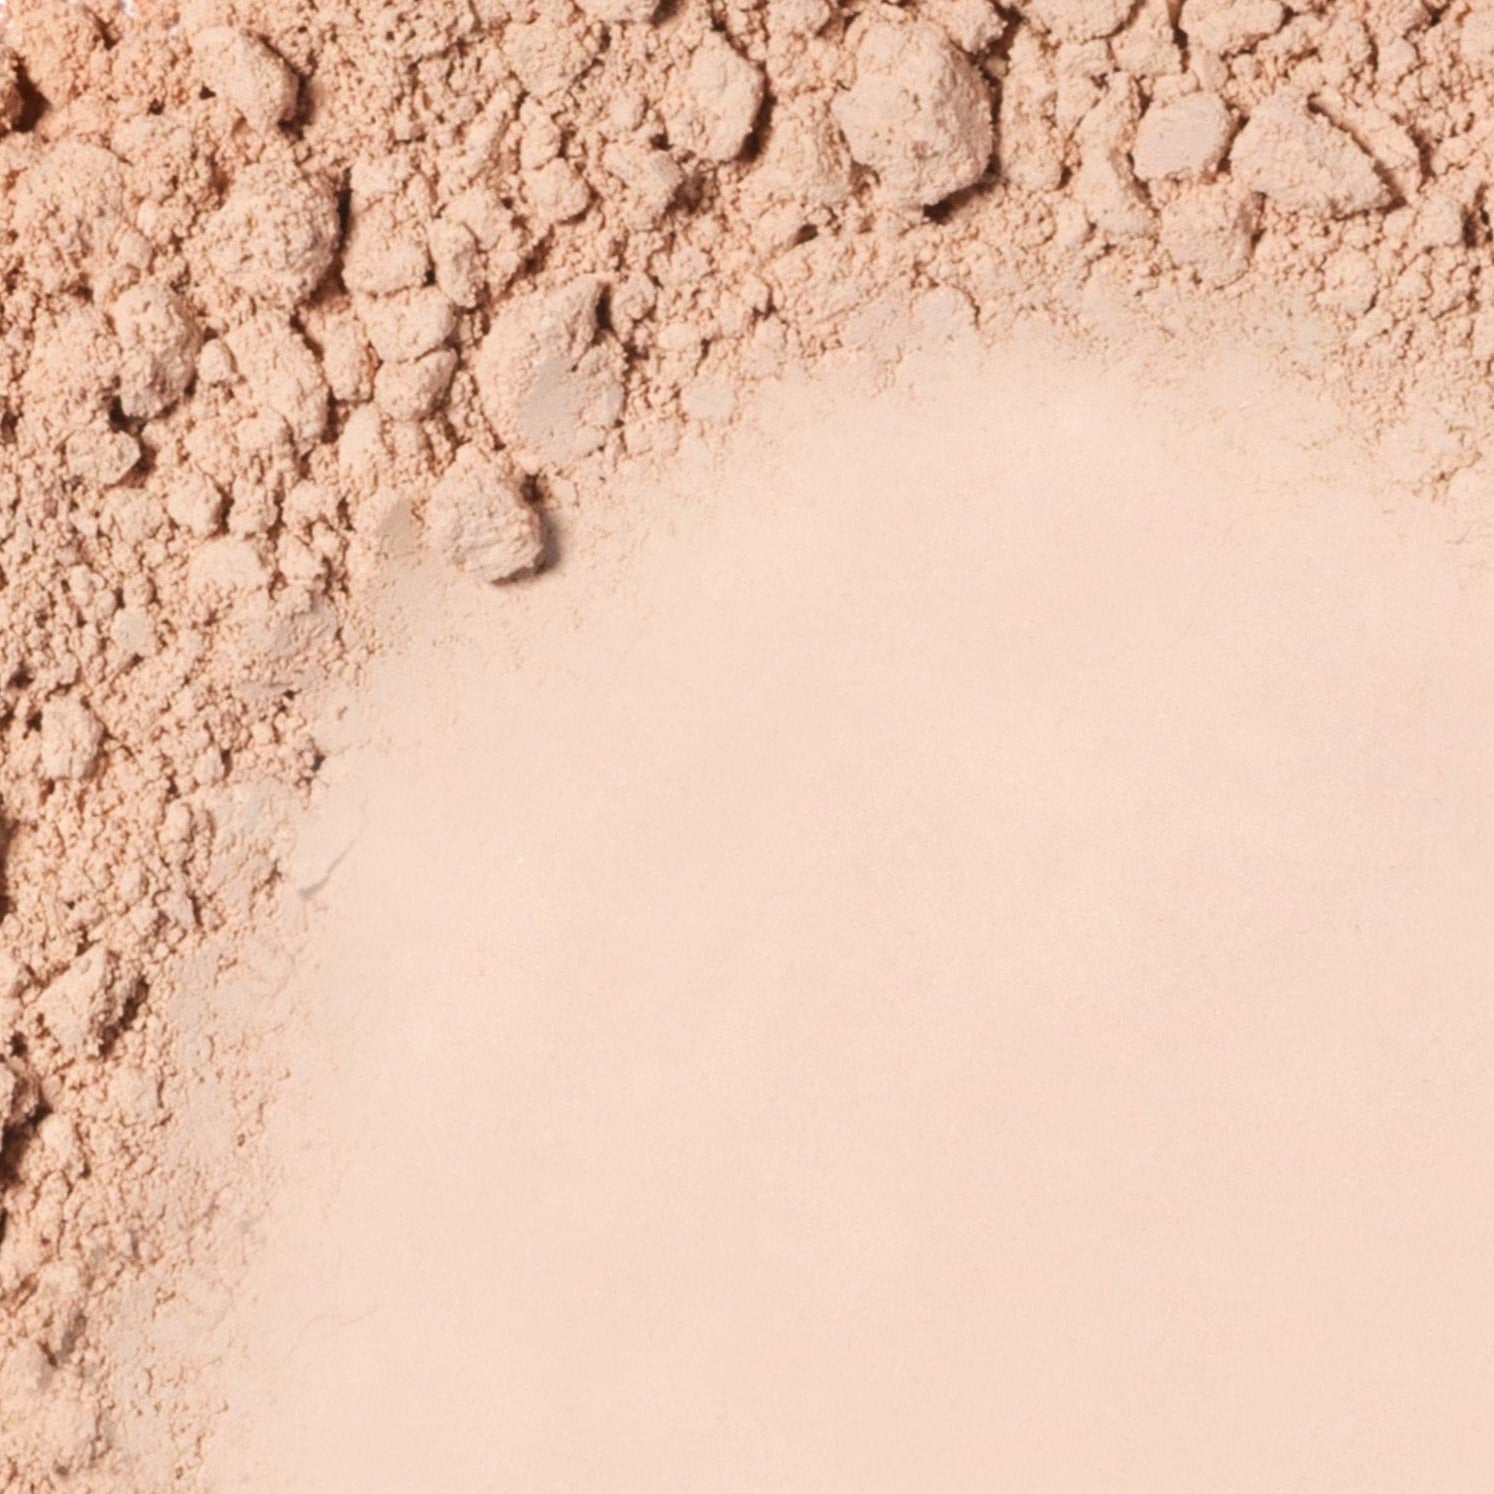 Feisty - Omiana Loose Powder Mineral Foundation No Titanium Dioxide and No Mica